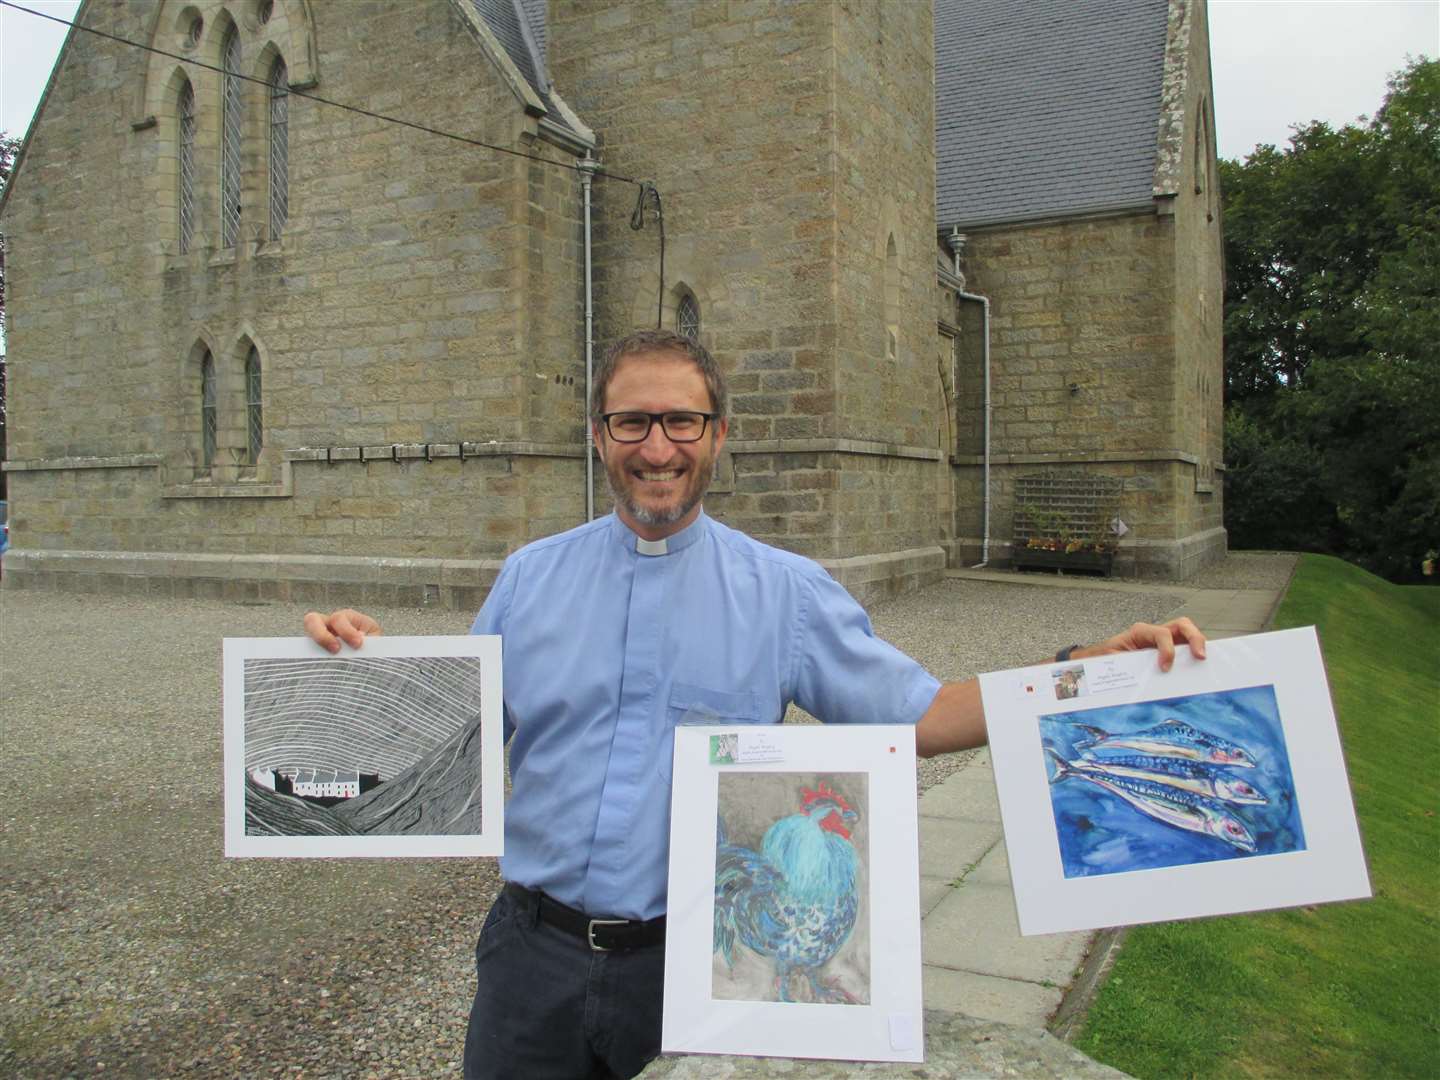 Methlick Parish Church minister Reverend Dr Will Stalder with some of the art that features in the online auction.